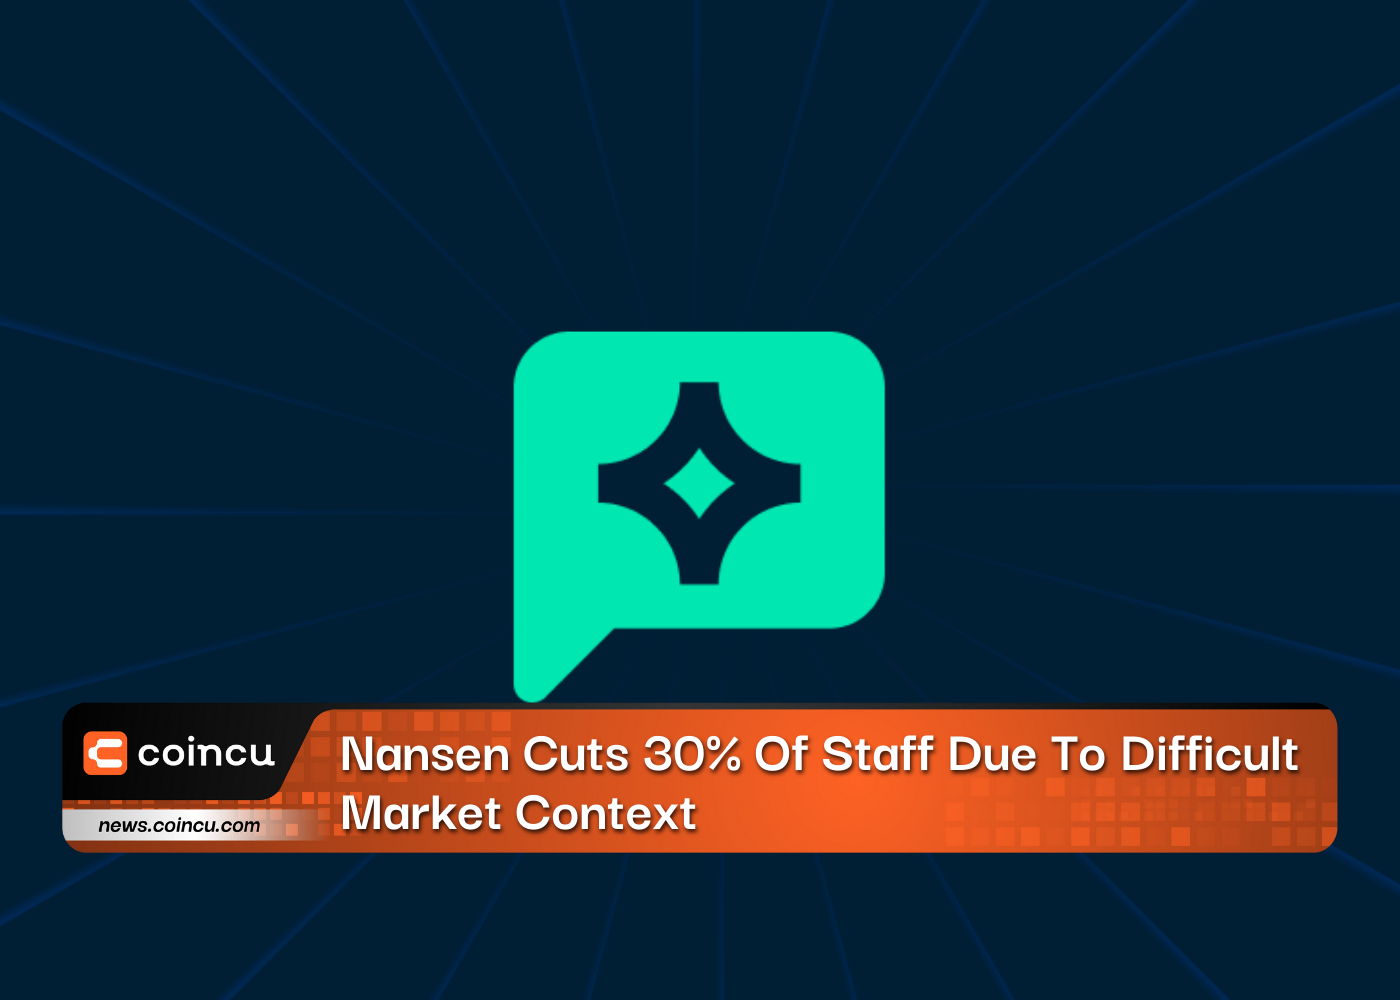 Nansen Cuts 30% Of Staff Due To Difficult Market Context